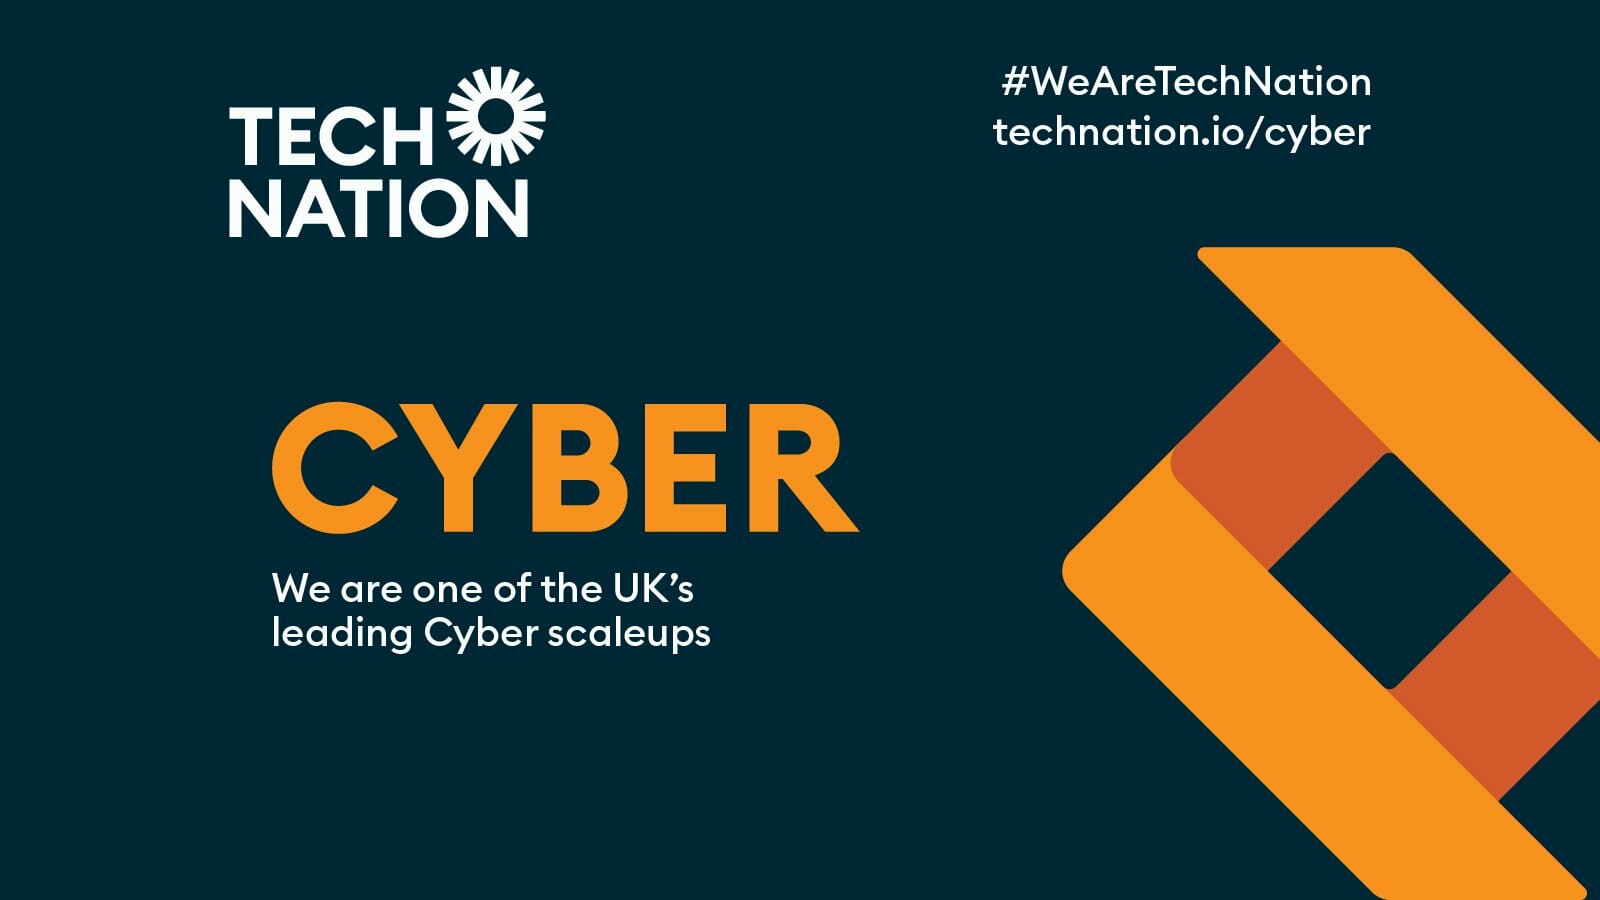 A branding image for the Tech Nation Cyber Scaleup